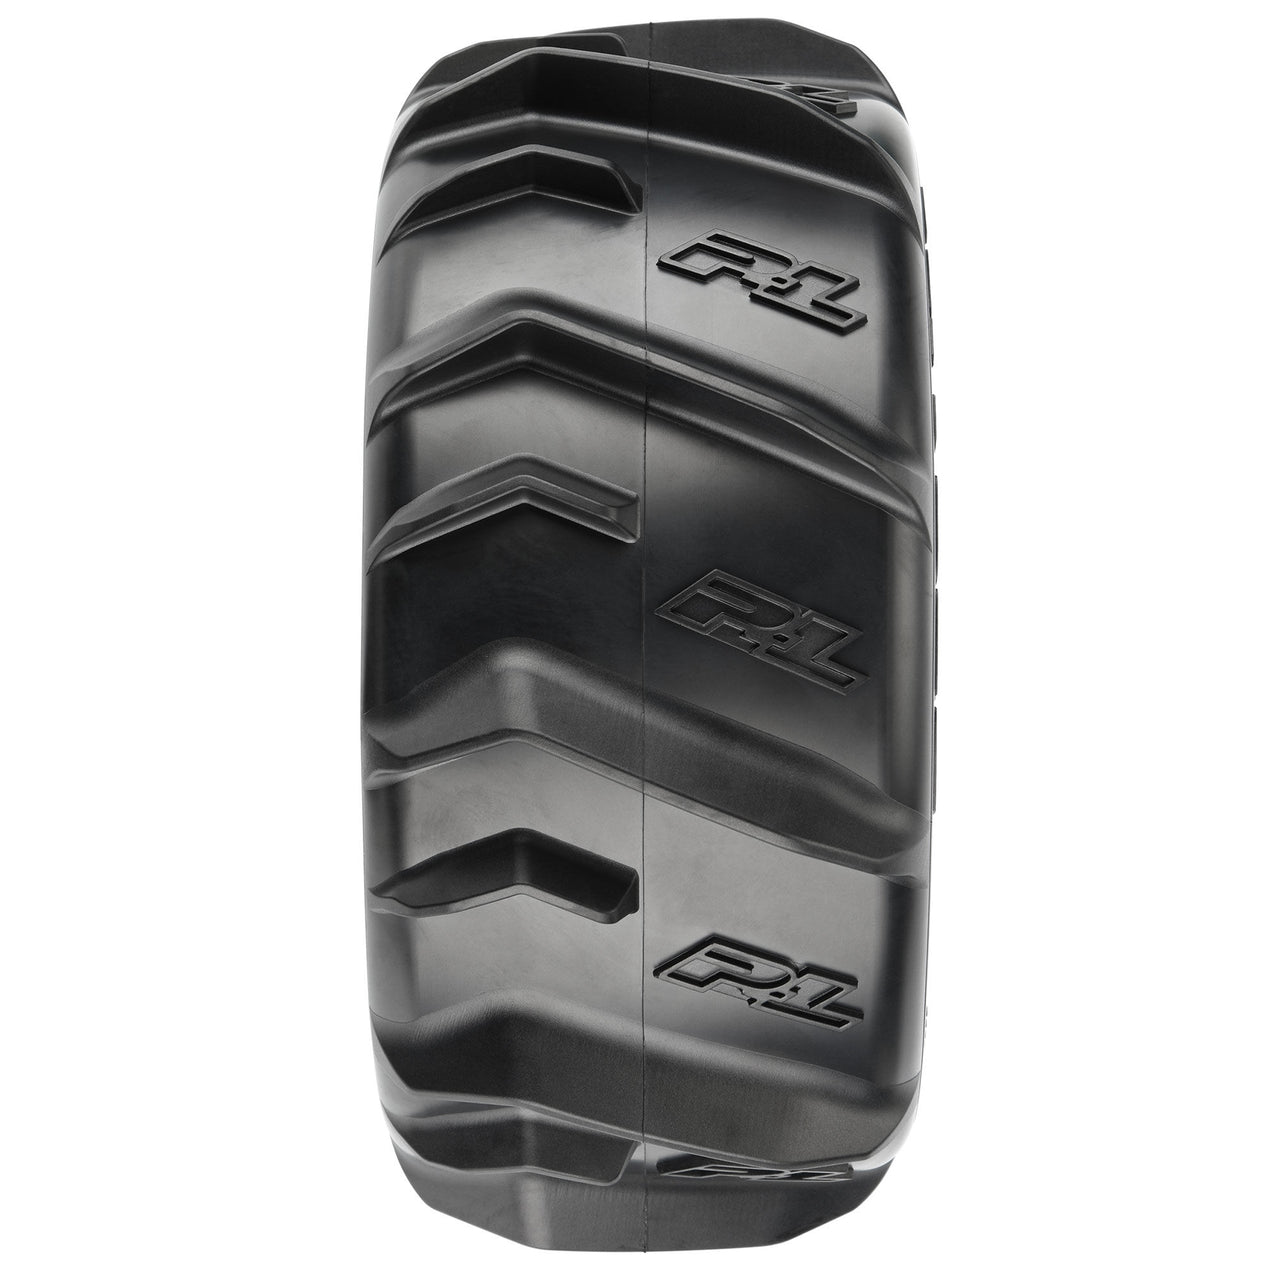 PRO1020211 1/6 Dumont Sand/Snow Front/Rear 5.7” Tires Mounted on Raid 8x48 Removable 24mm Hex Wheels (2): Black